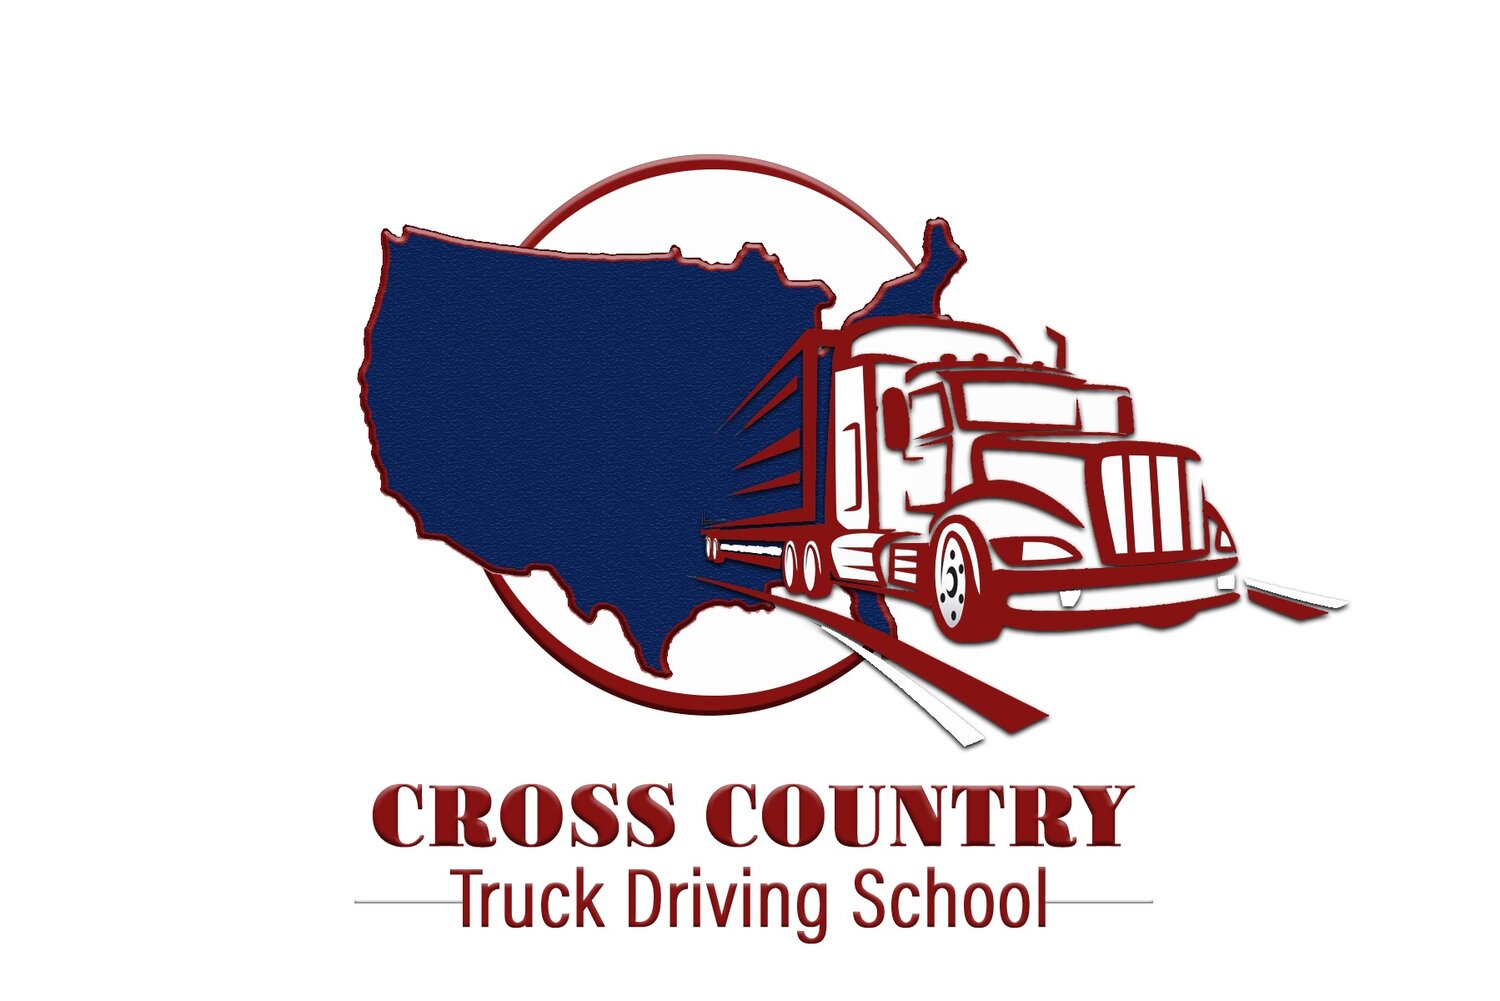 About — CrossCountry Truck Driving School